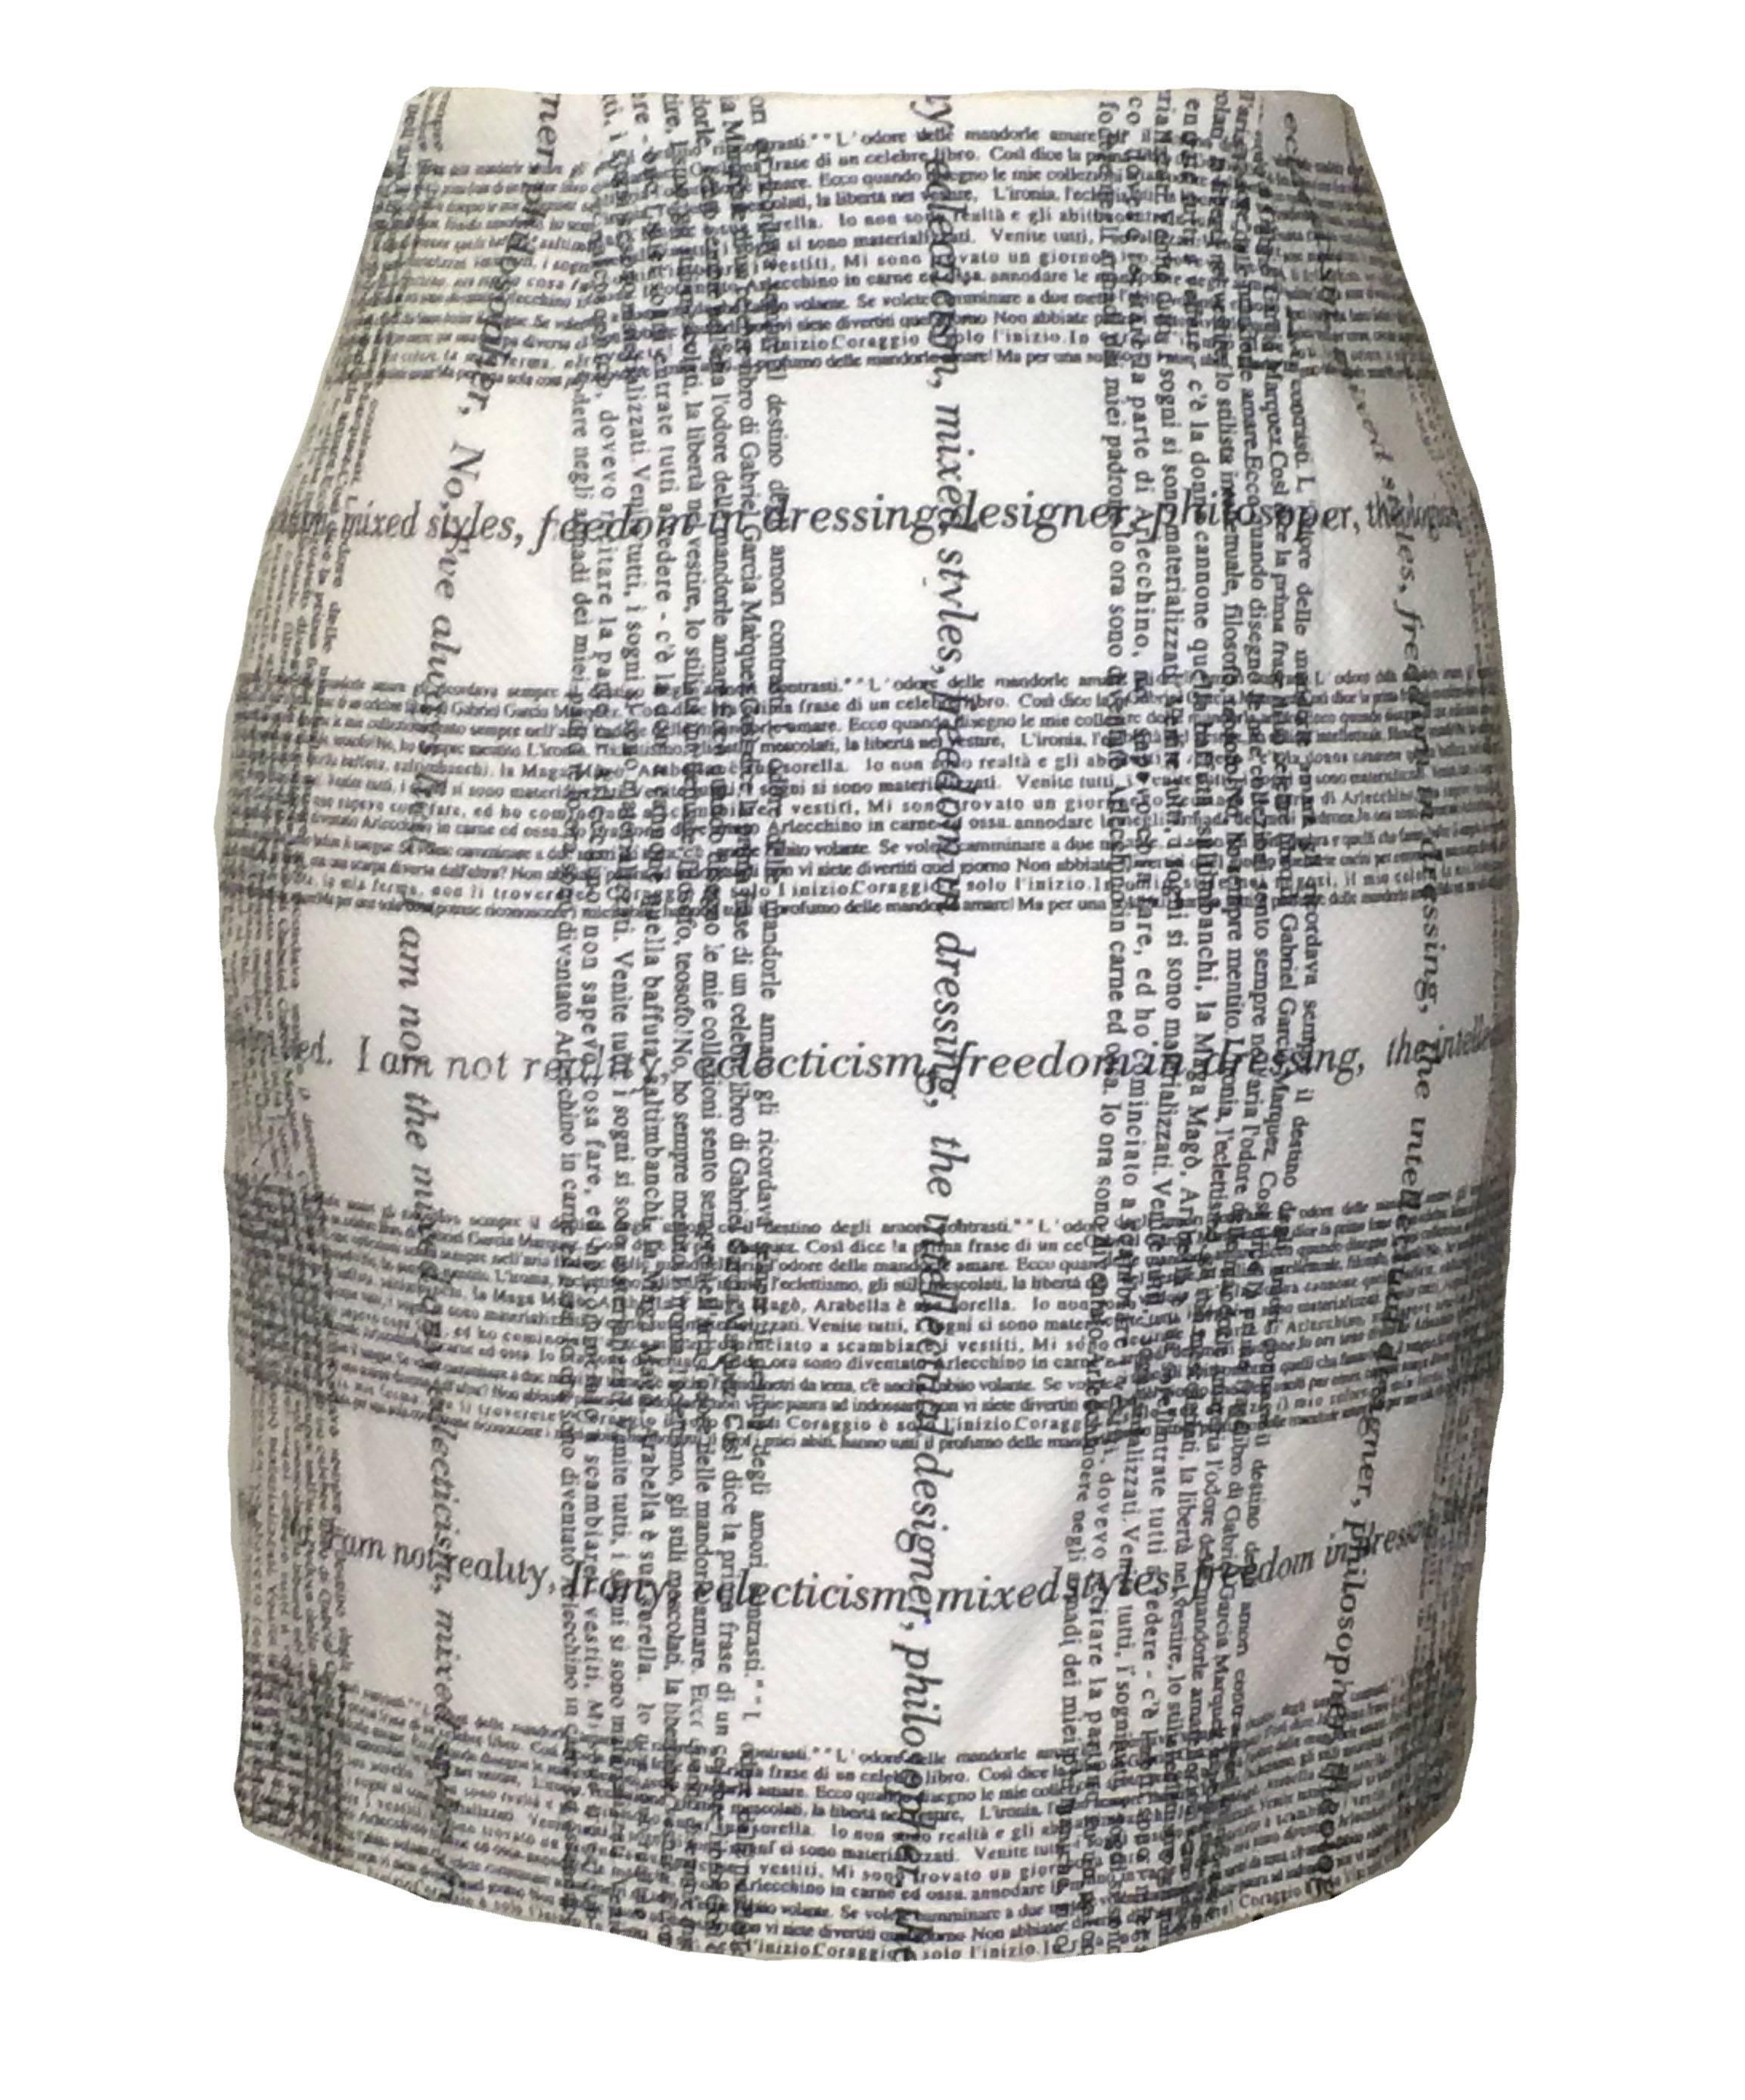 Moschino Cheap & Chic 1990's textured white skirt with black Italian & English typeface forming a plaid design. Side zip and hook & eye.

100% cotton.
Fully lined in 60% acetate, 40% rayon.

Made in Italy.

Size IT 38. Fits like 0-2.
Waist